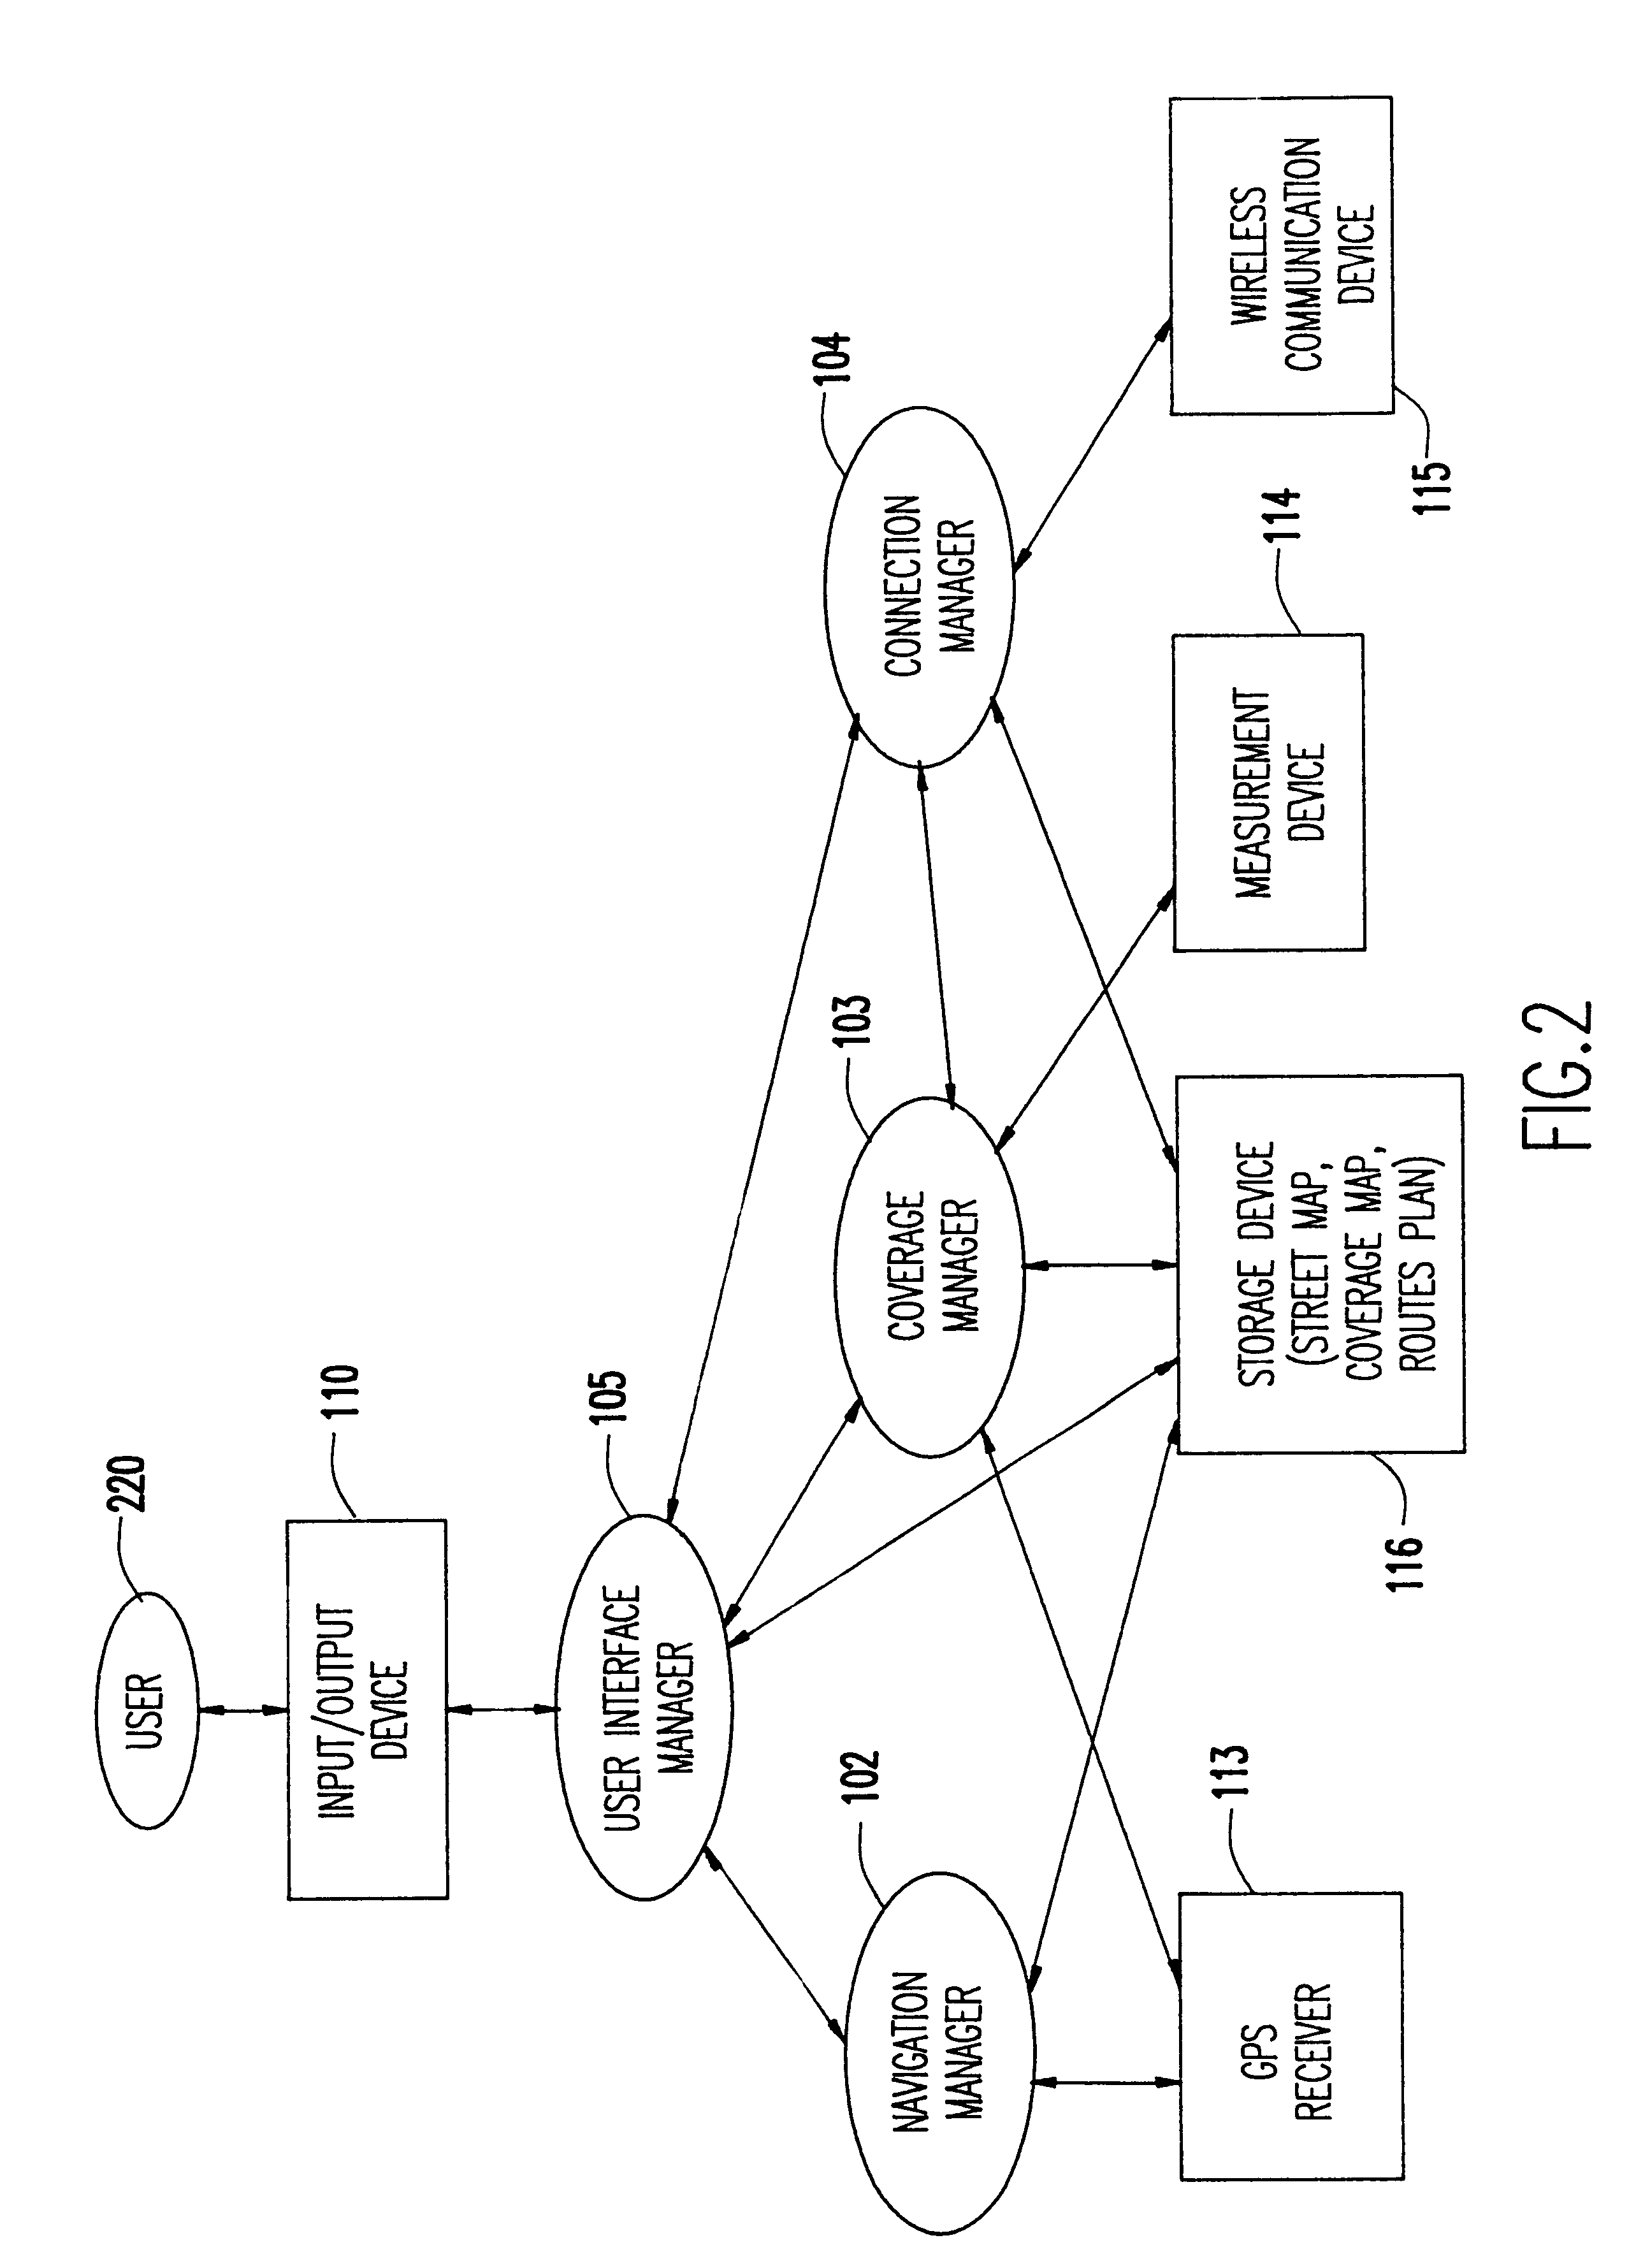 Dual map system for navigation and wireless communication